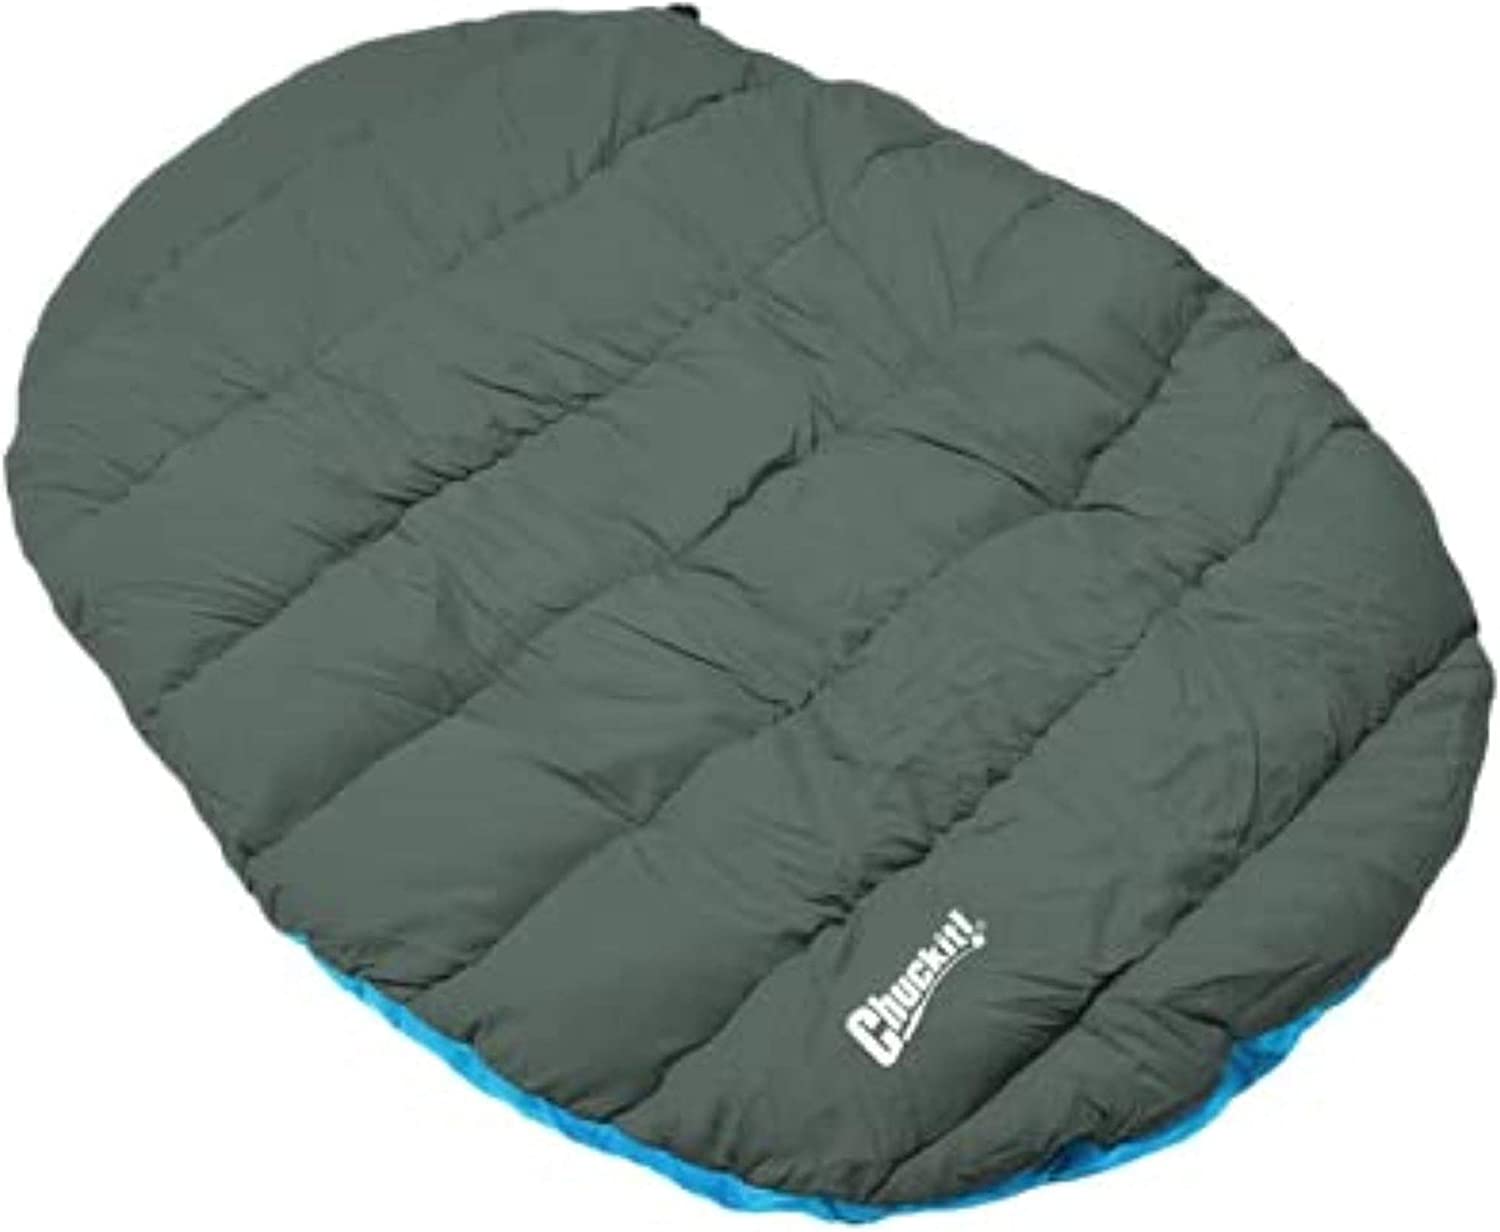 11. Chuckit Water Resistant Travel Dog Bed